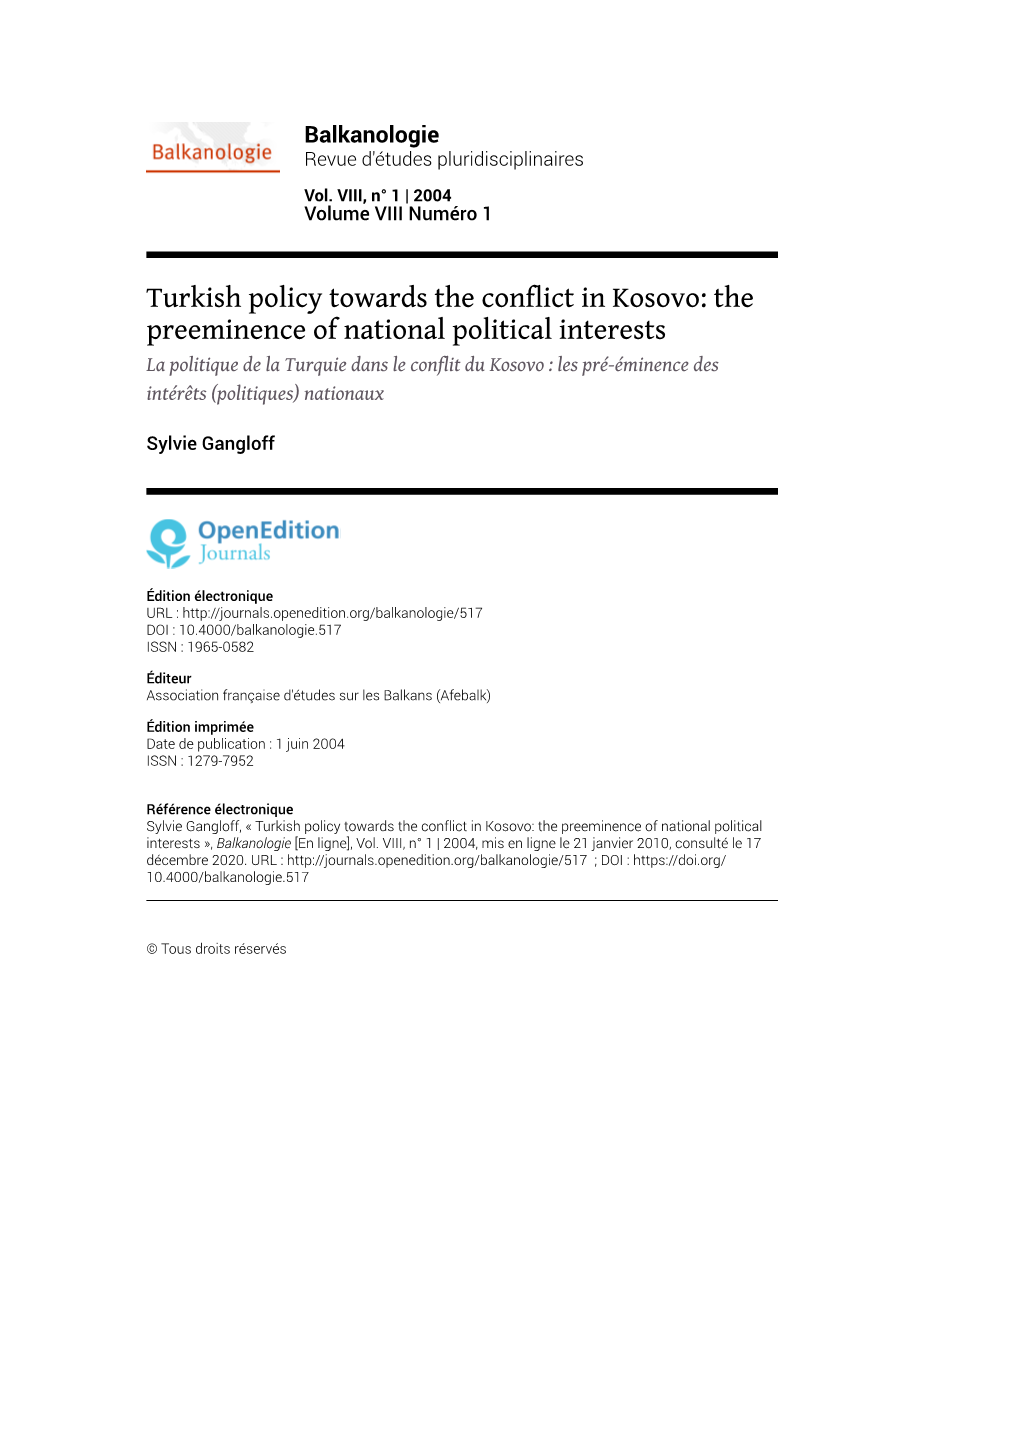 Turkish Policy Towards the Conflict in Kosovo